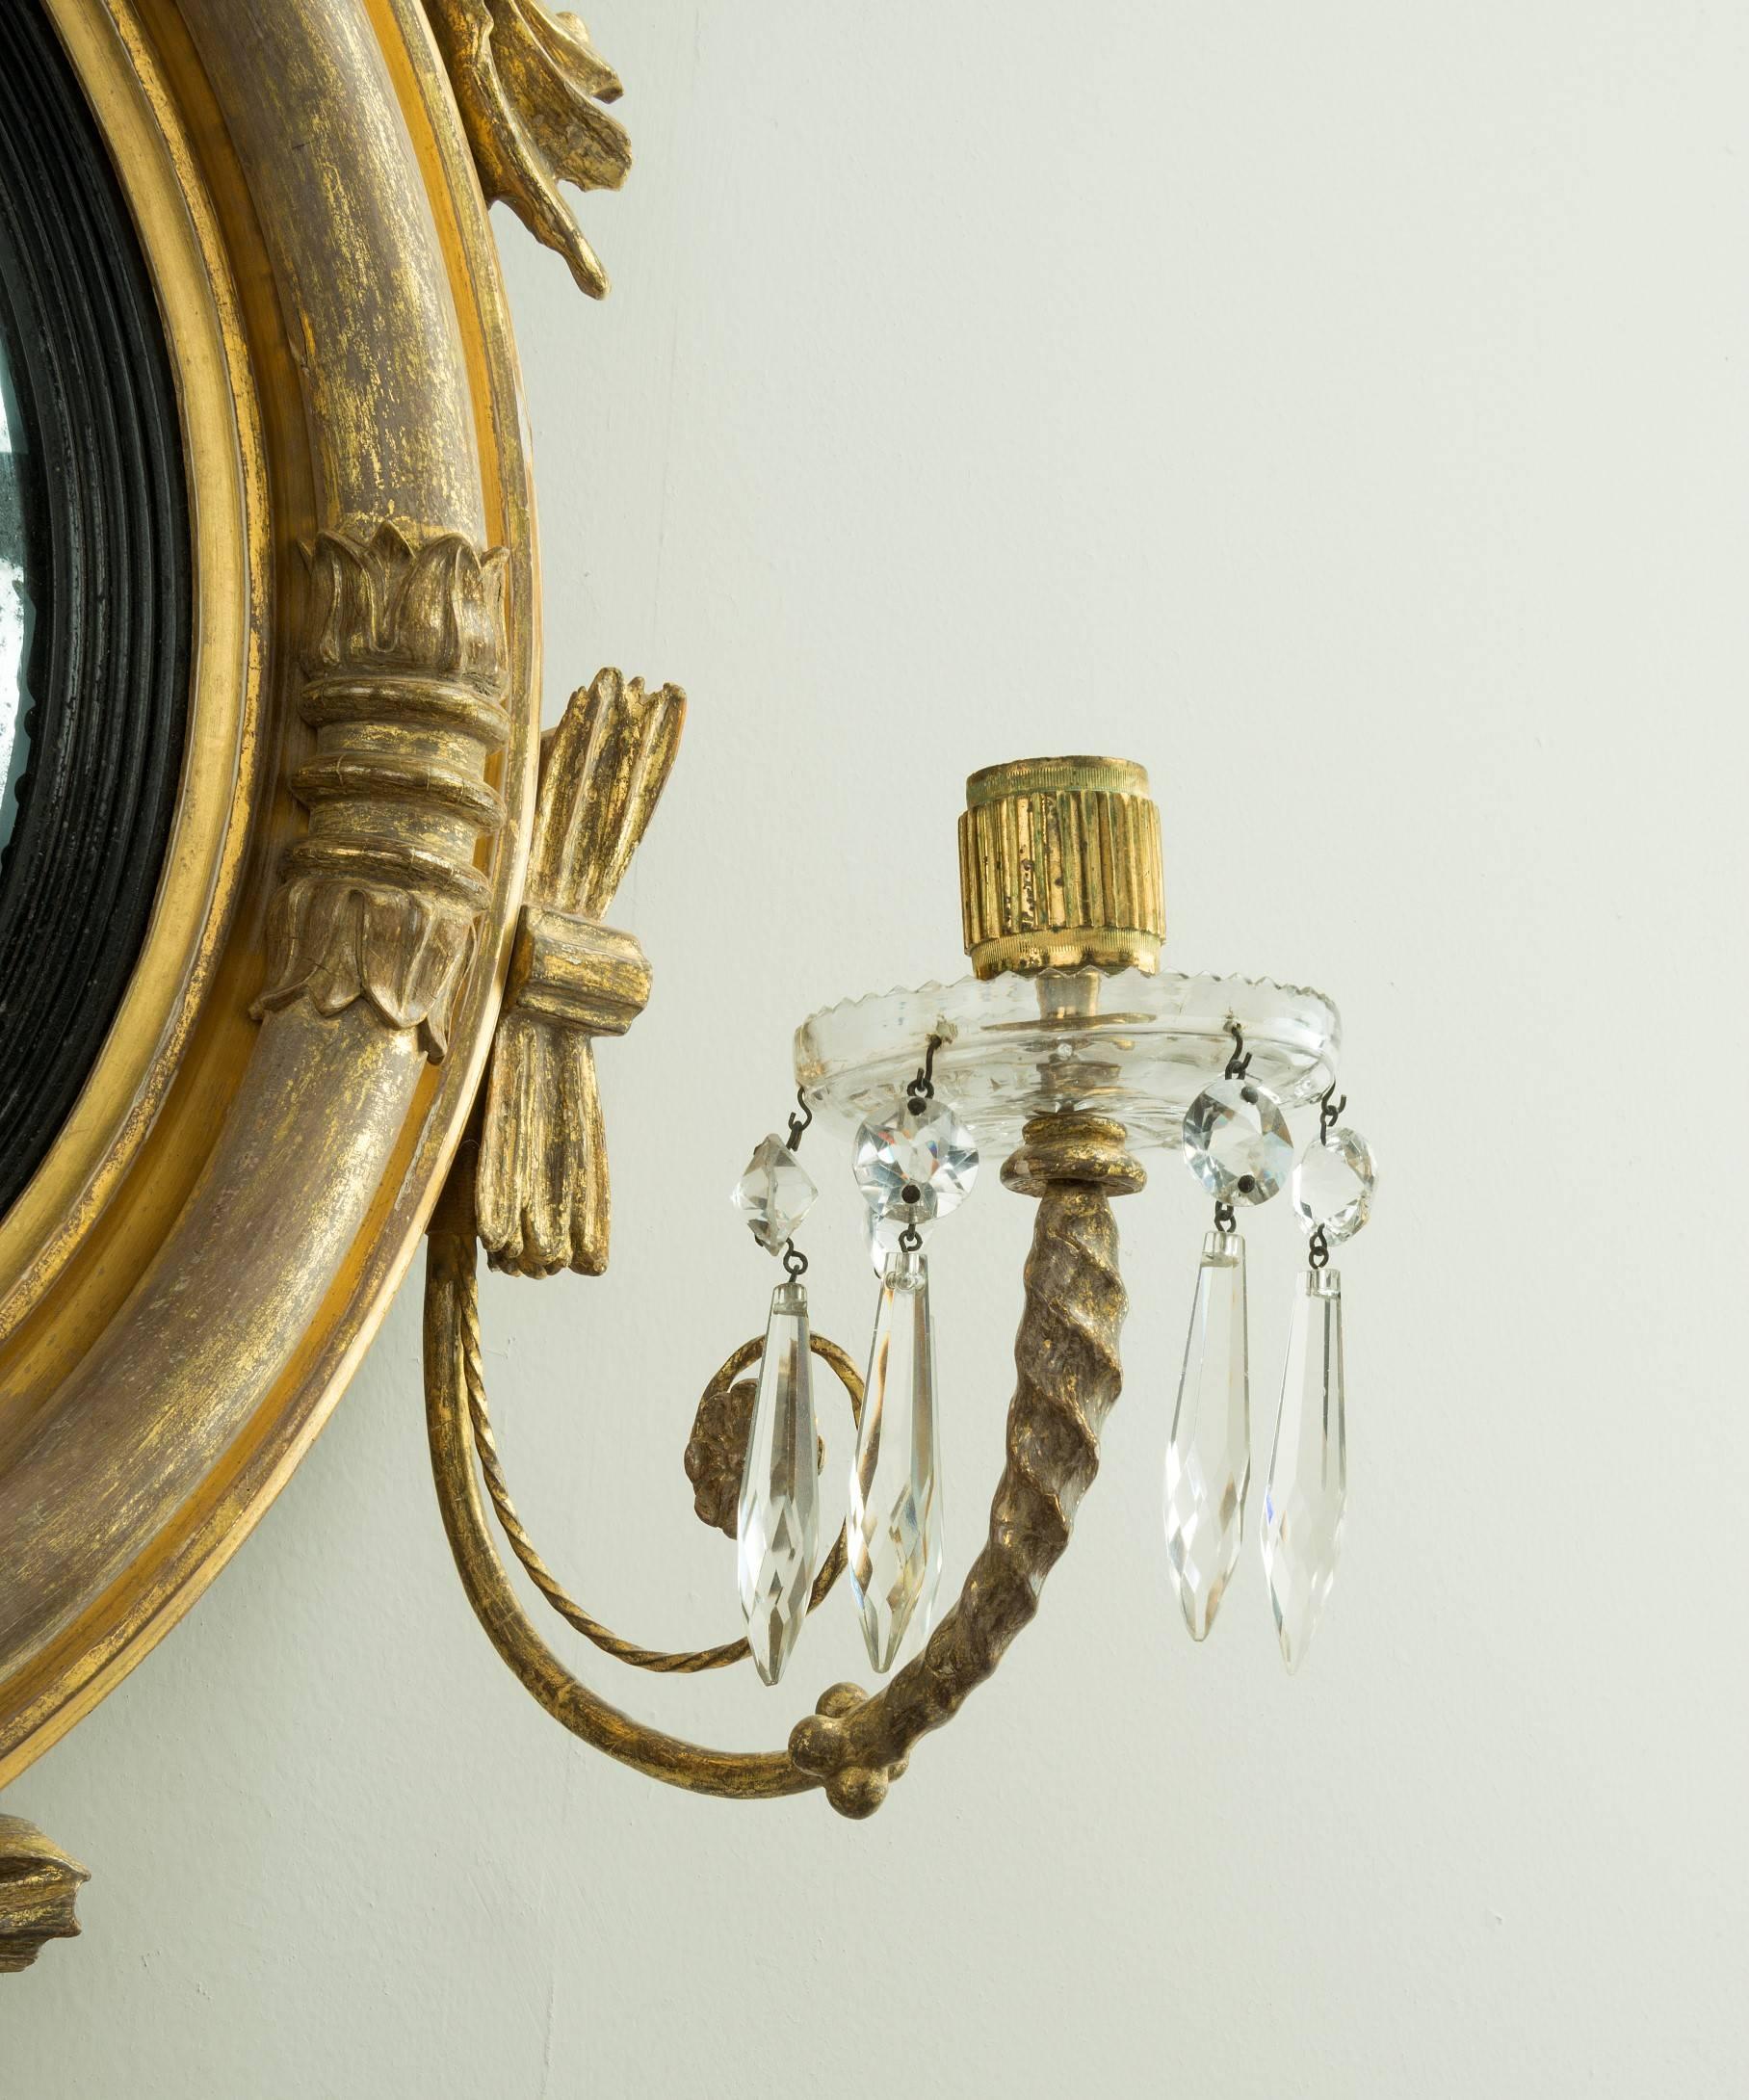 A Regency period carved giltwood convex mirror; the original convex mirror plate set within a reeded ebonized slip and a carved giltwood frame which is decorated with lotus leaves; the mirror frame is surmounted by an eagle flanked by snakes